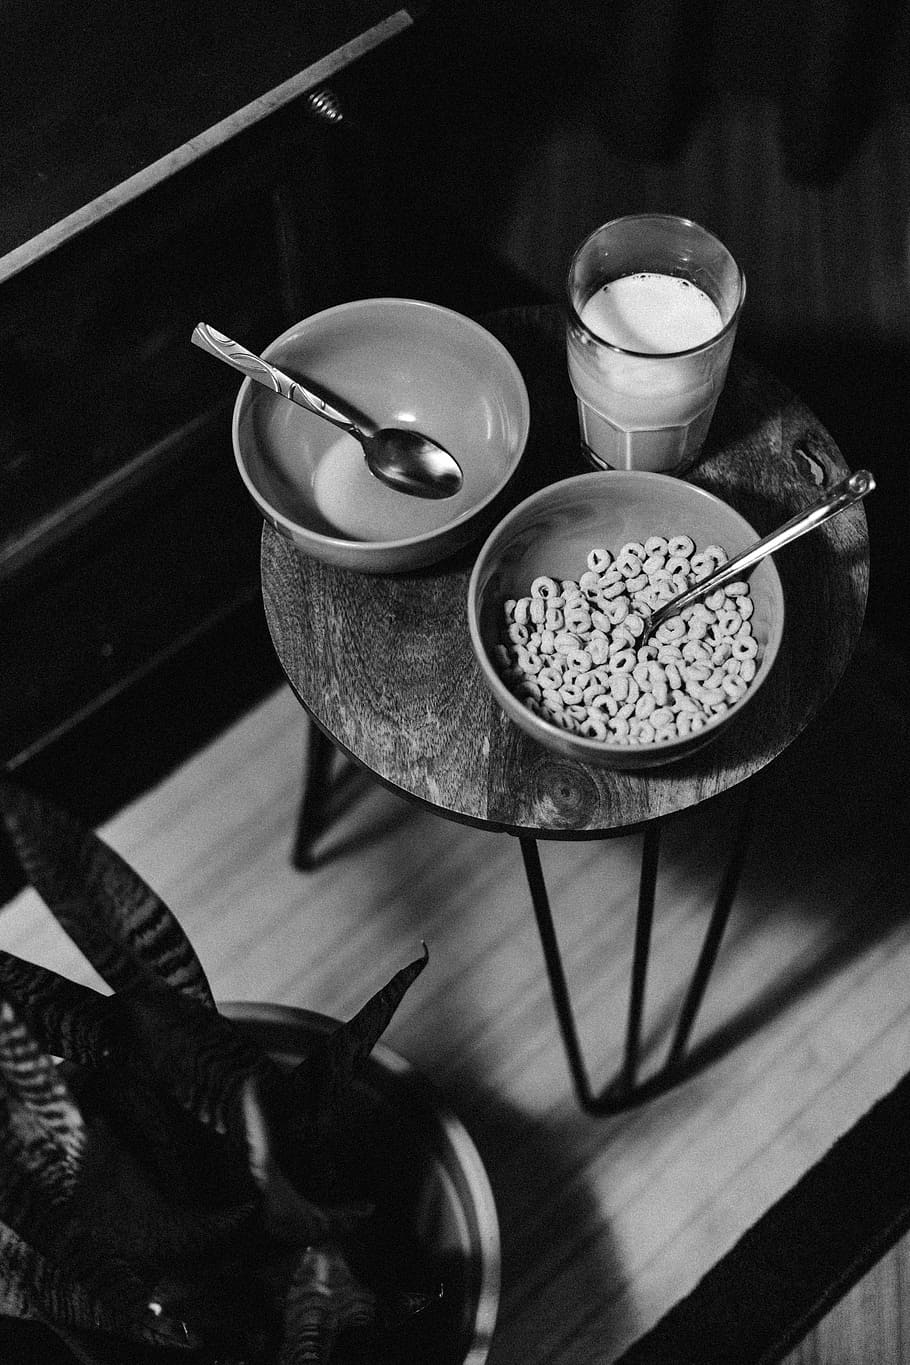 grayscale photo of bowl of cereal beside glass of milk, grayscale photography of cereals and milk on table